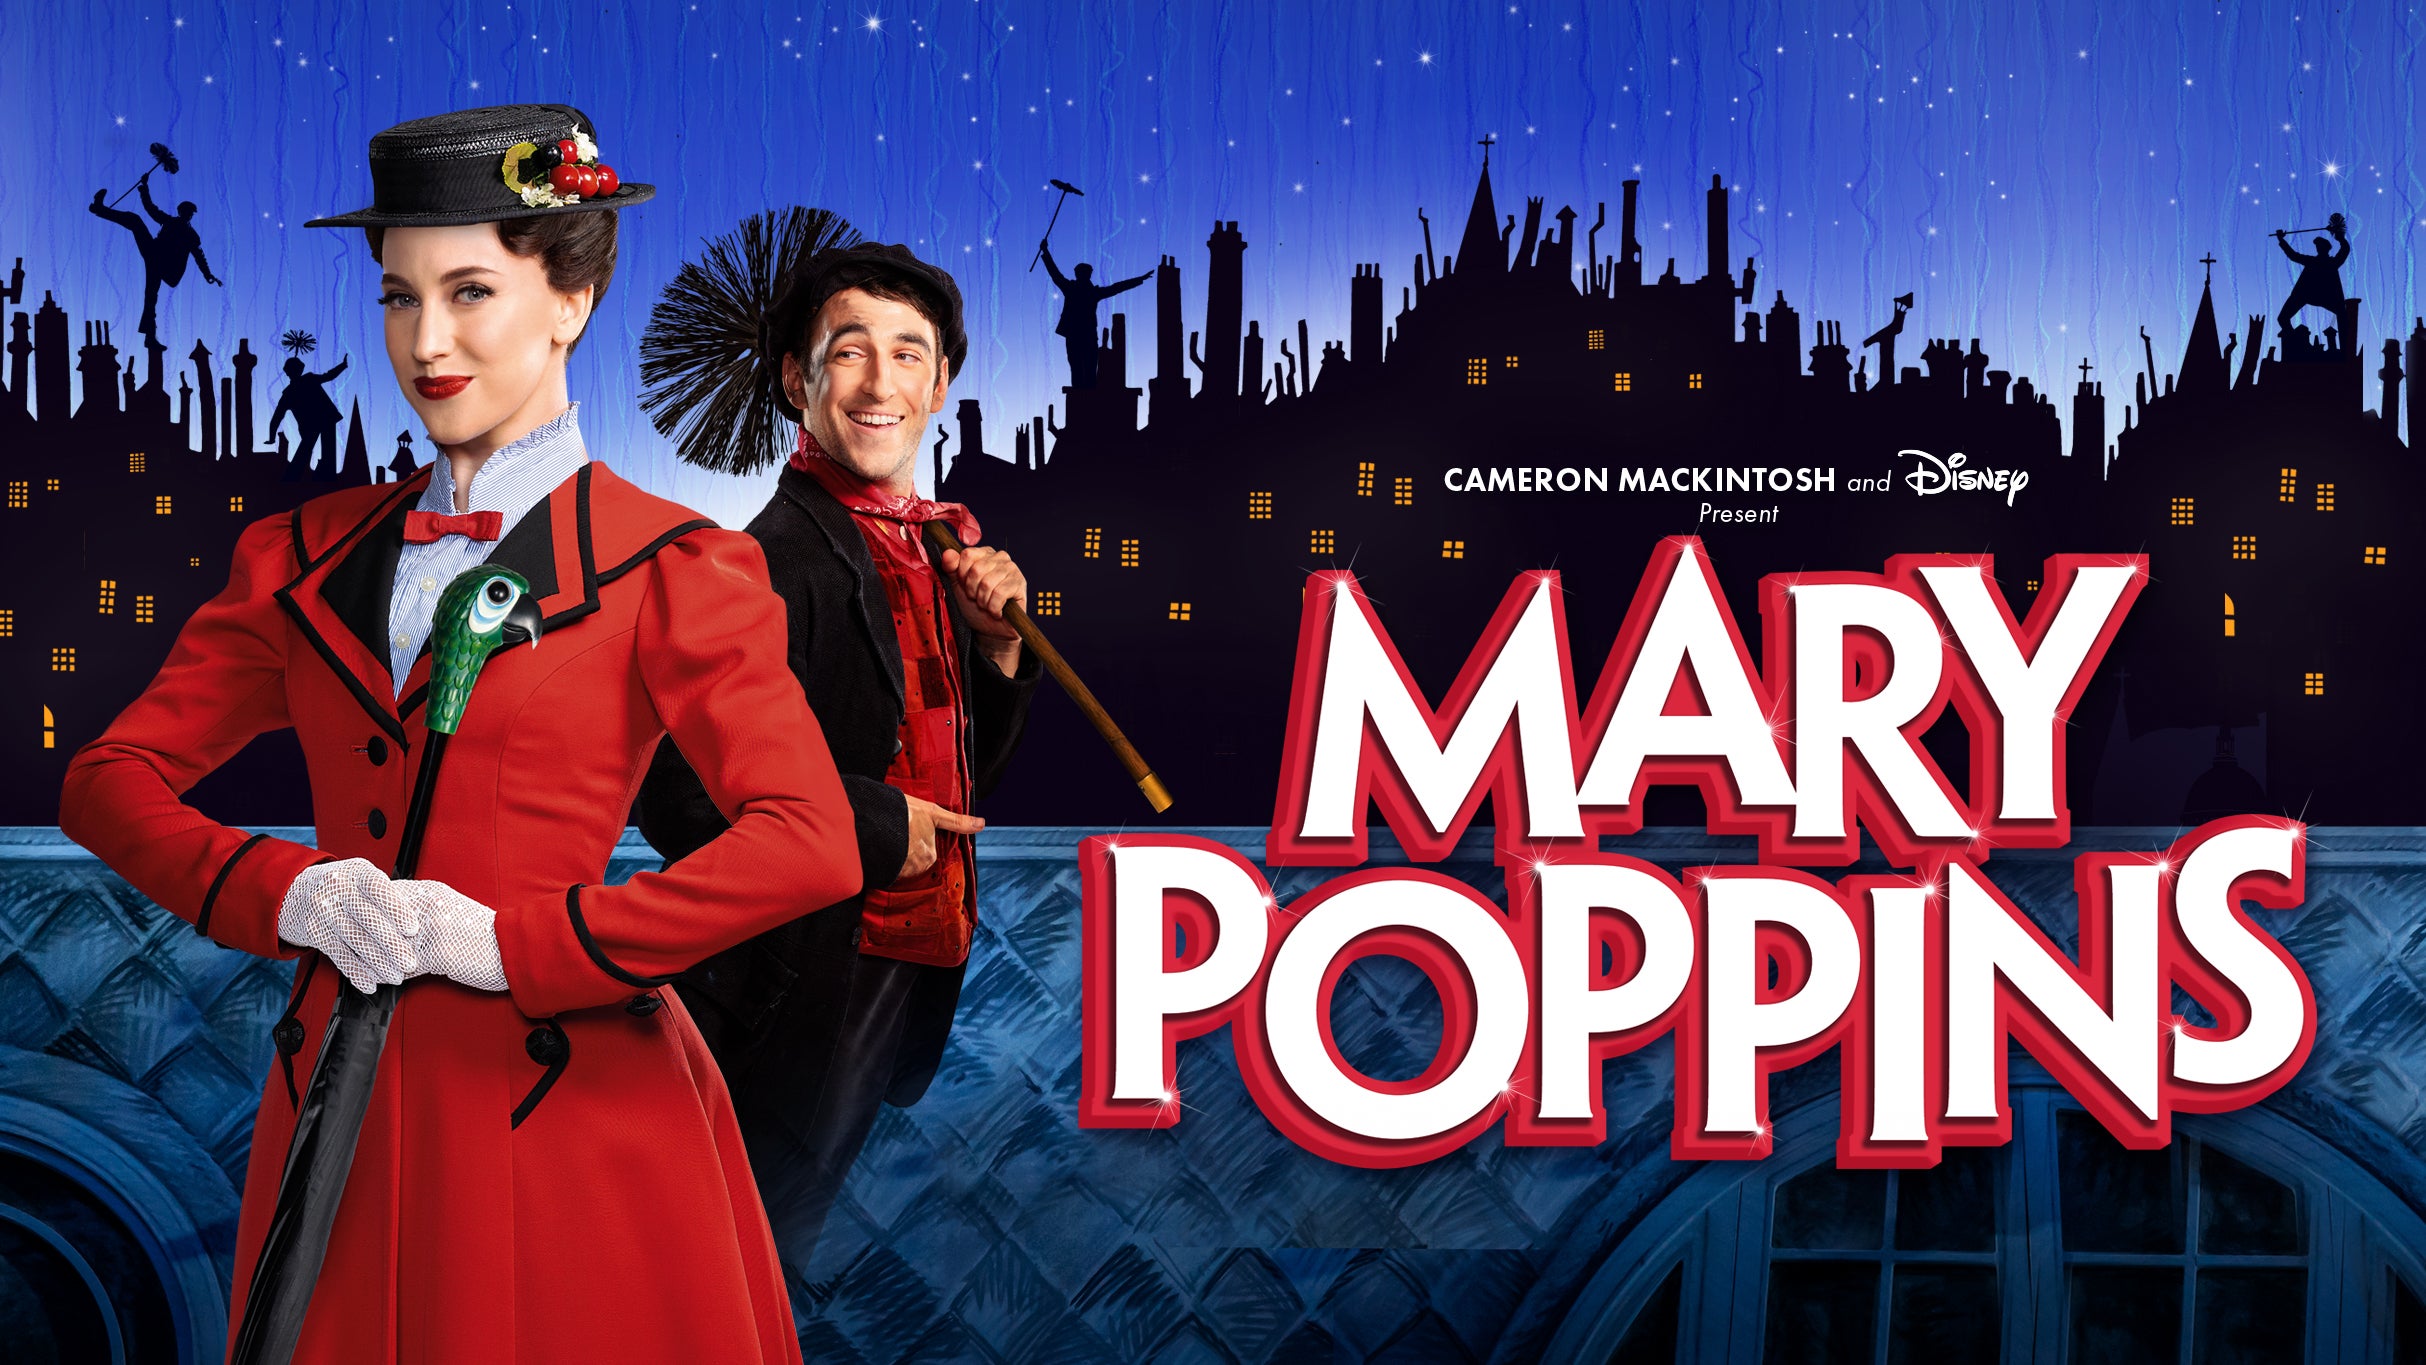 Mary Poppins - Captioned Performance in Dublin promo photo for BGE Rewards presale offer code